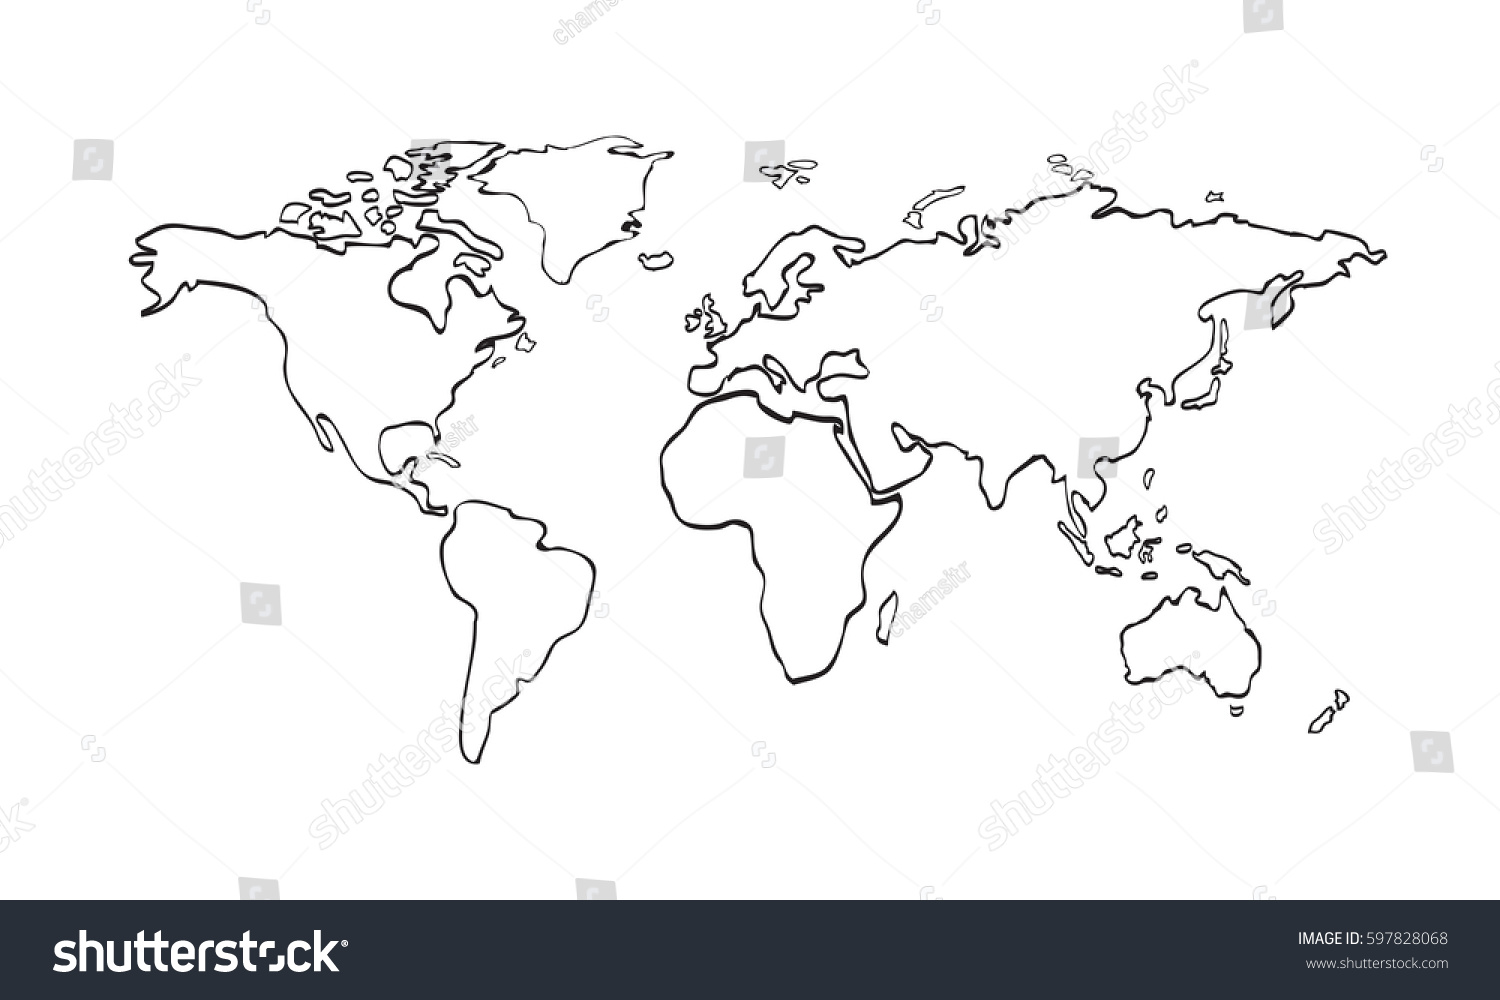 Illustration Vector Hand Draw Wold Map Stock Vector (Royalty Free ...